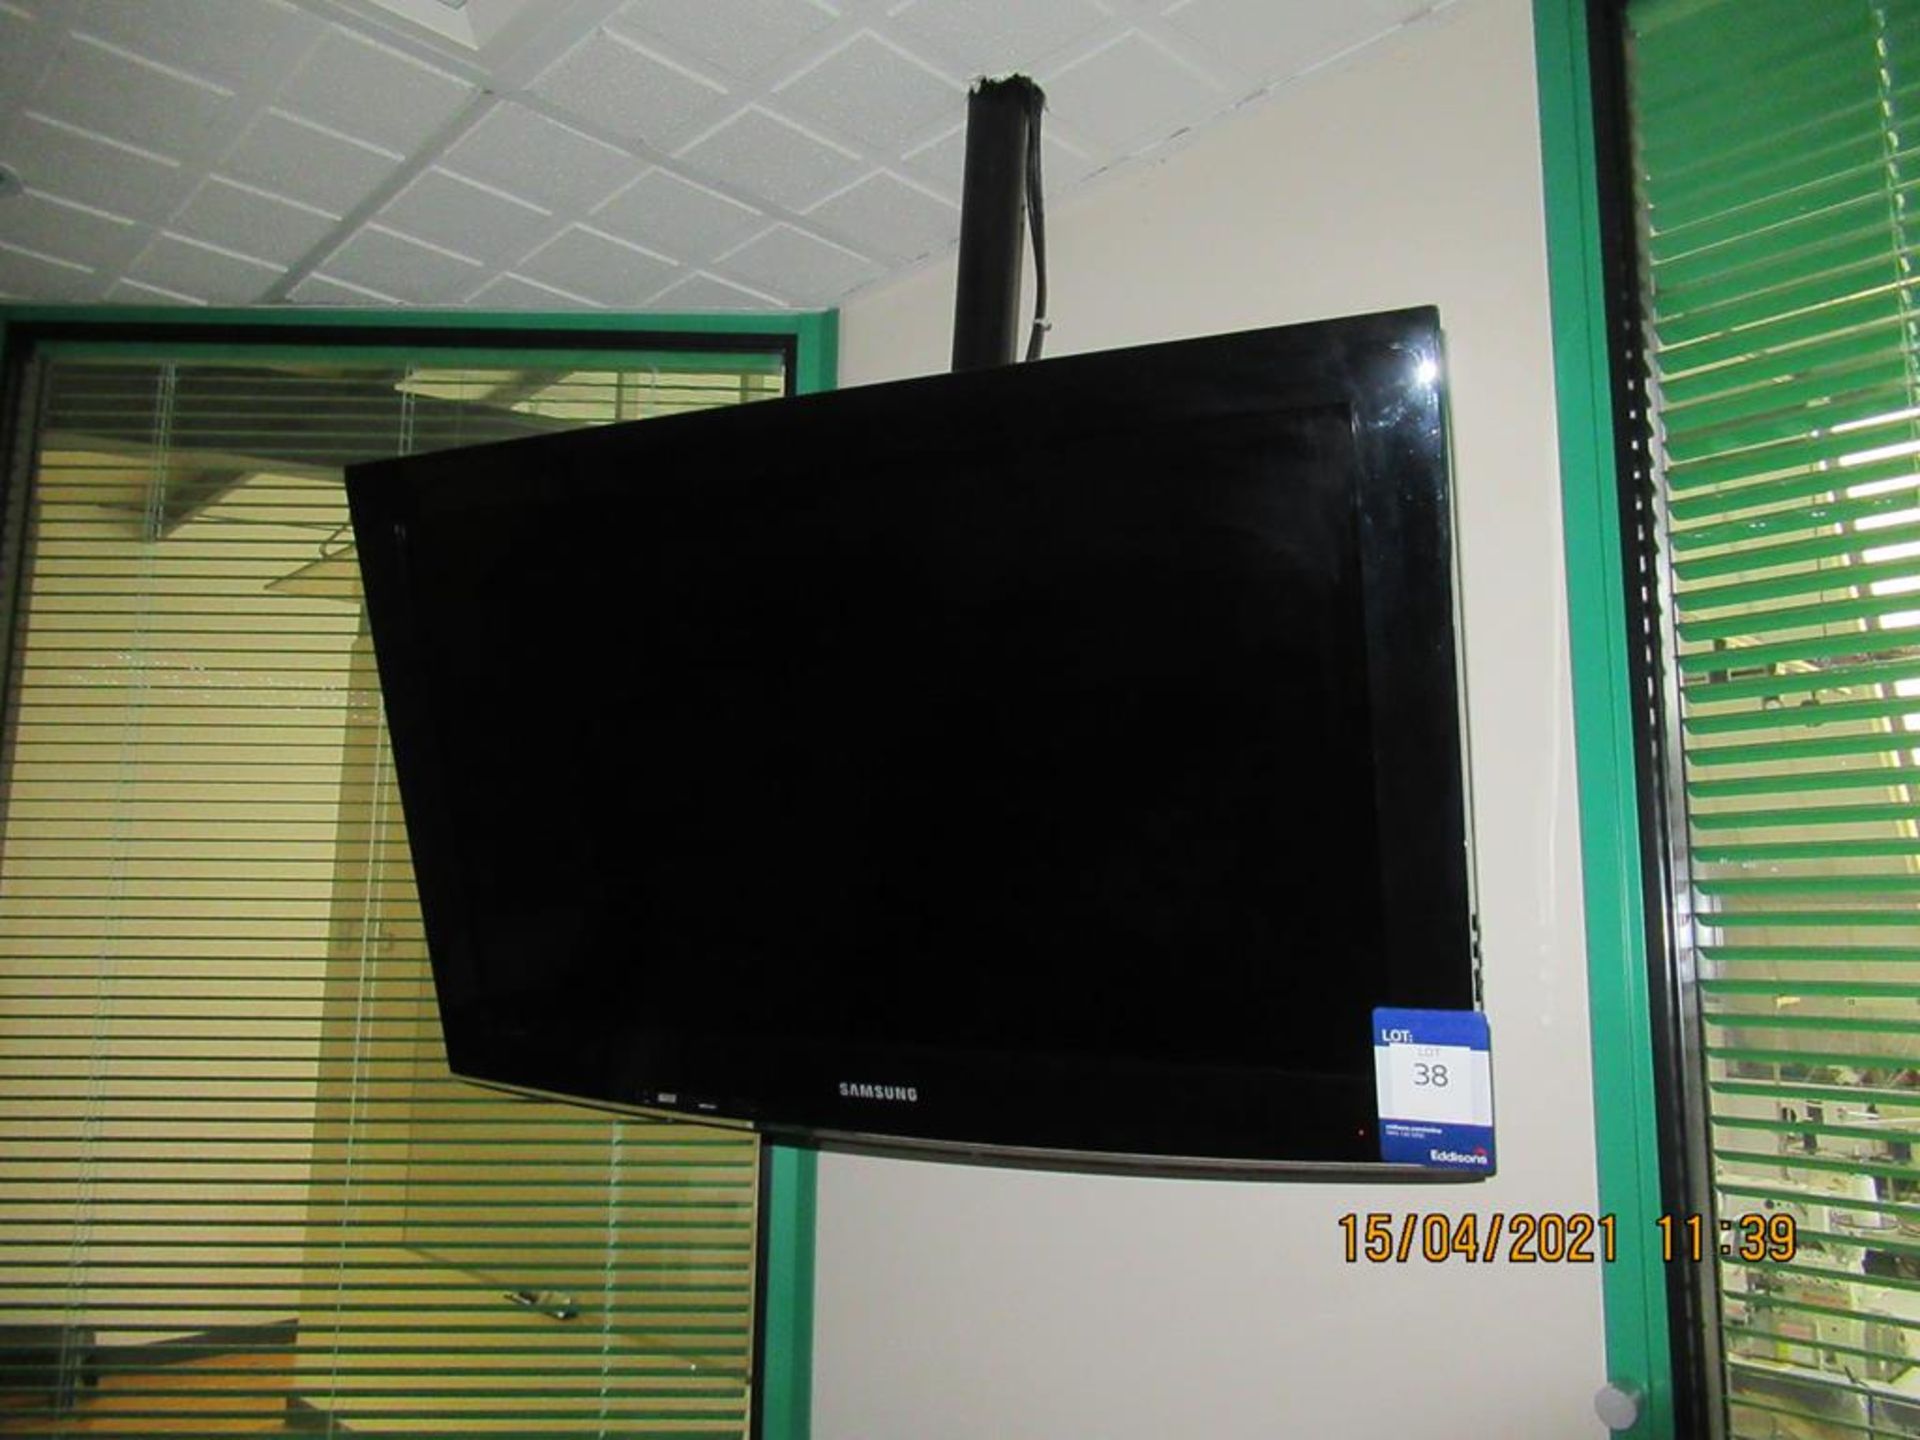 Samsung LE32A457C1D LCD TV with Remote Control.